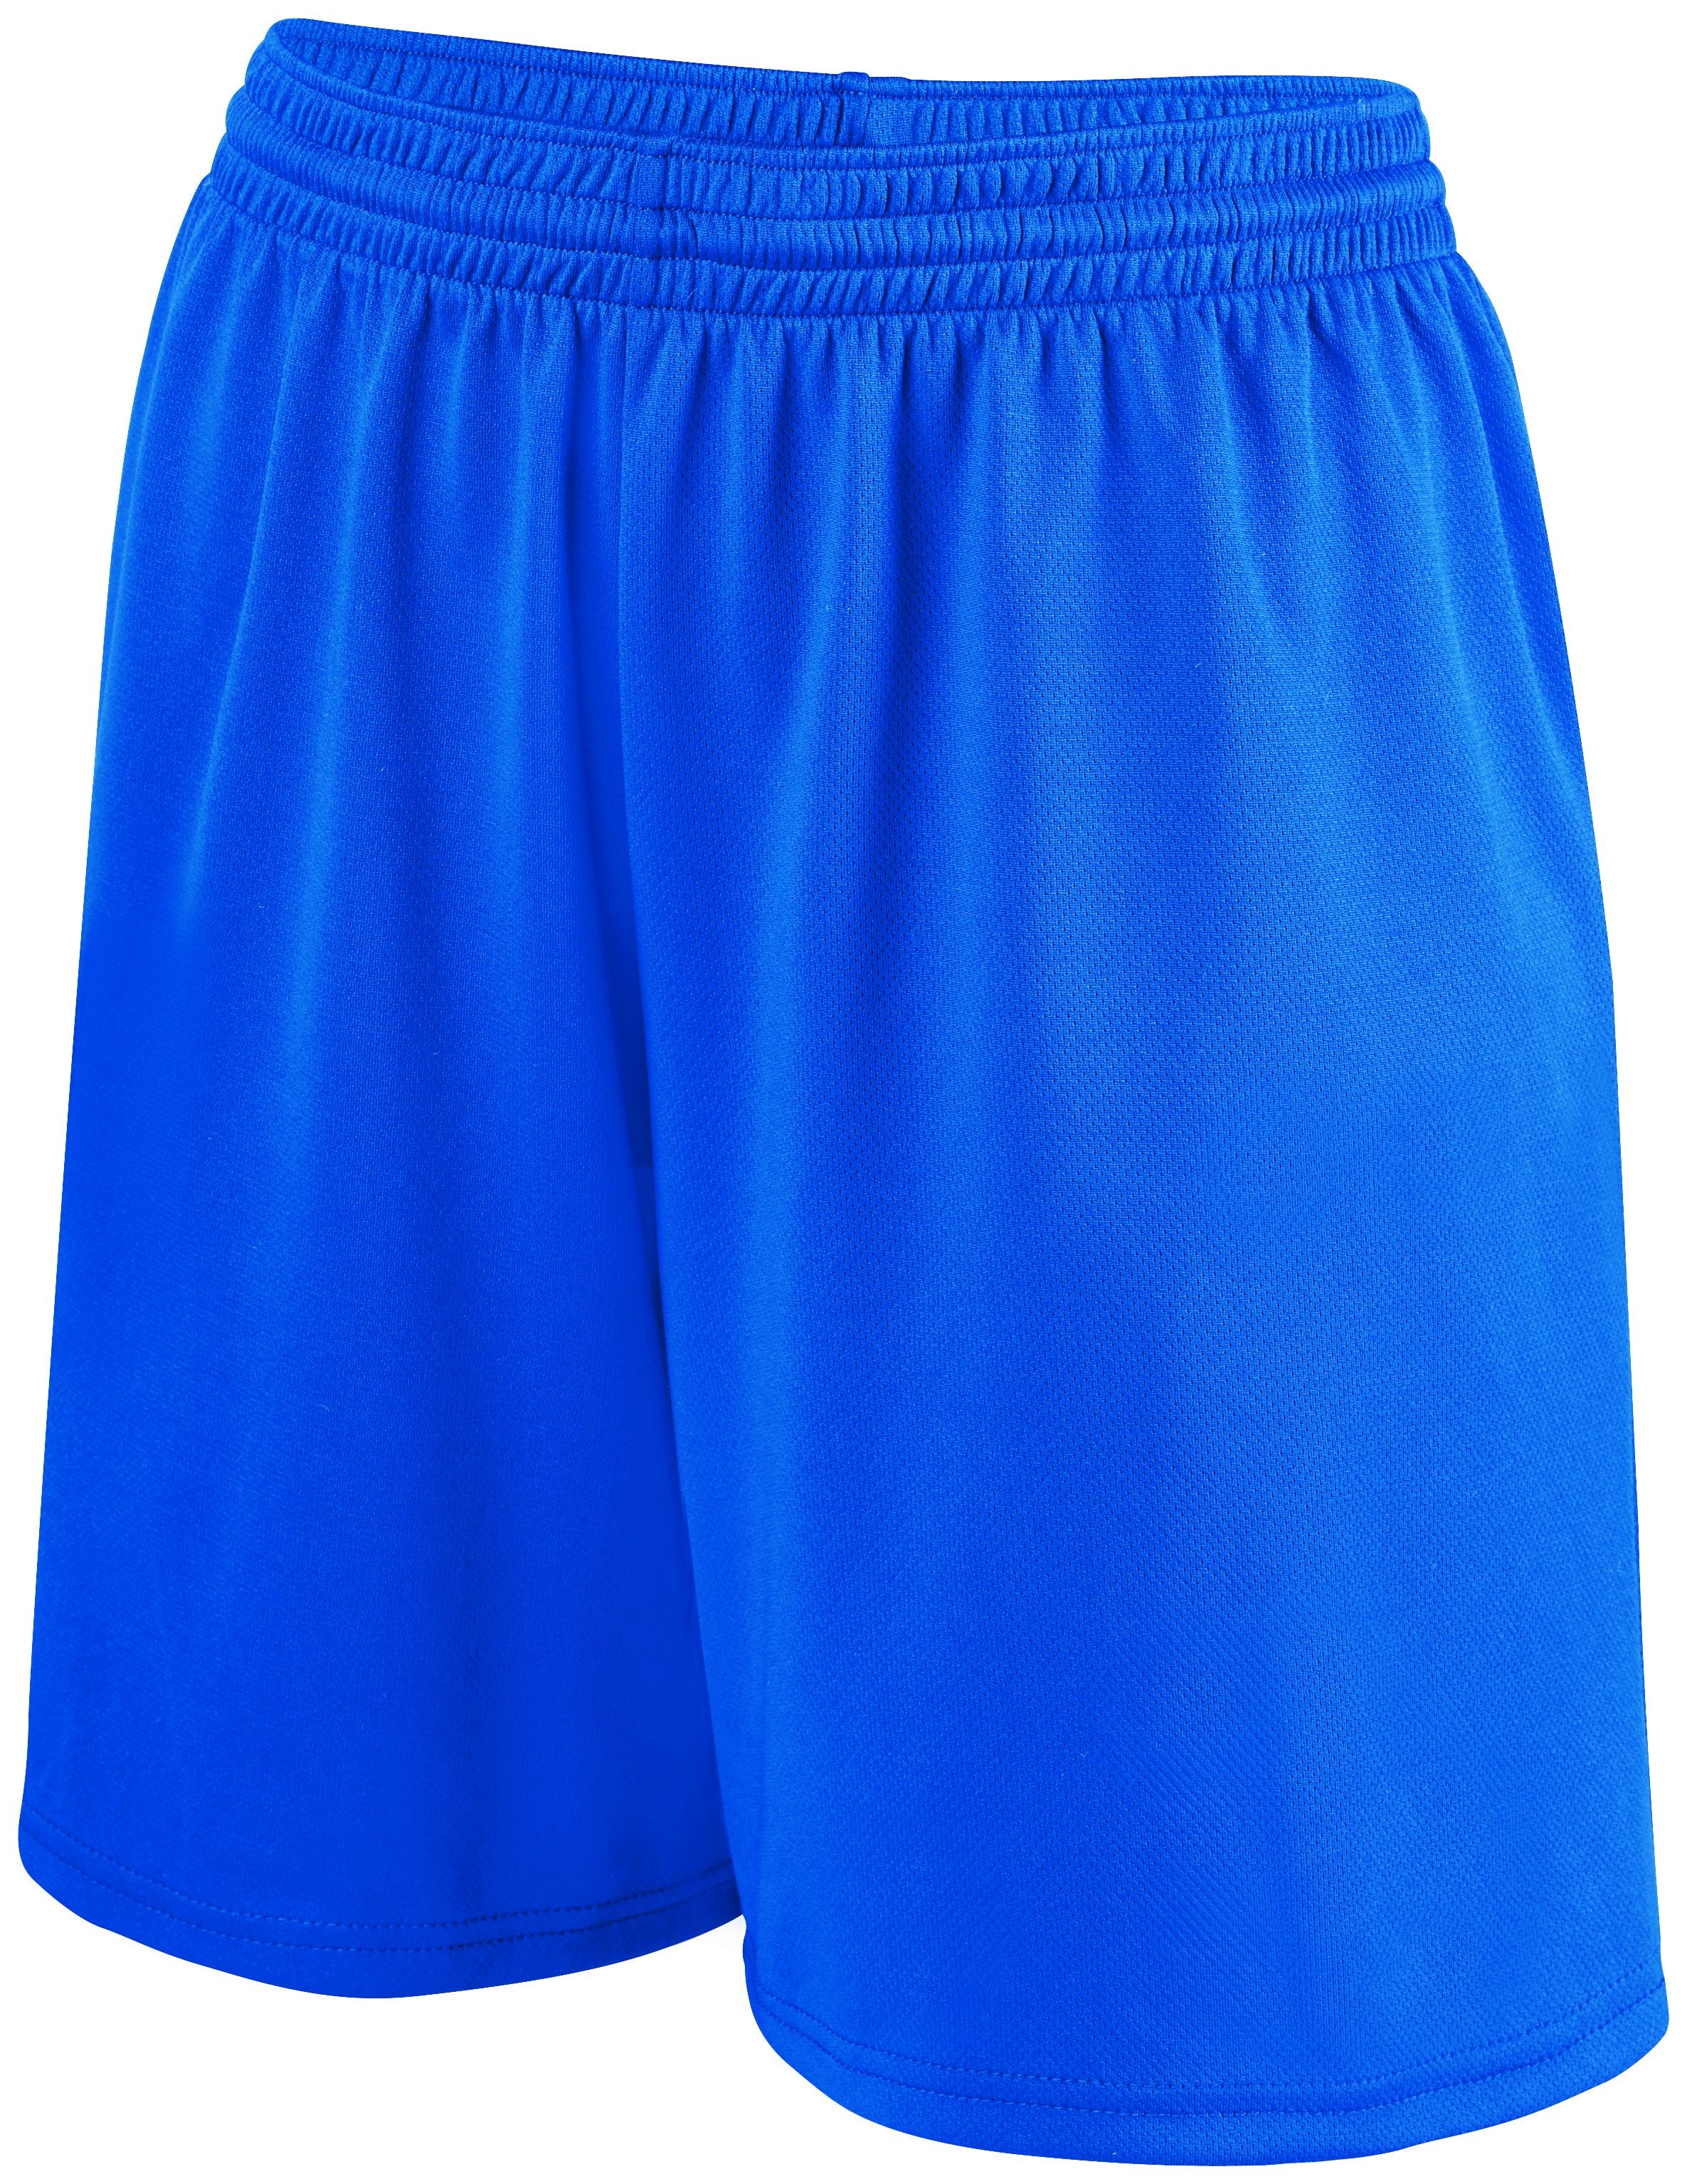 Augusta Sportswear Ladies Shockwave Shorts in Royal/White  -Part of the Ladies, Ladies-Shorts, Augusta-Products, Softball product lines at KanaleyCreations.com